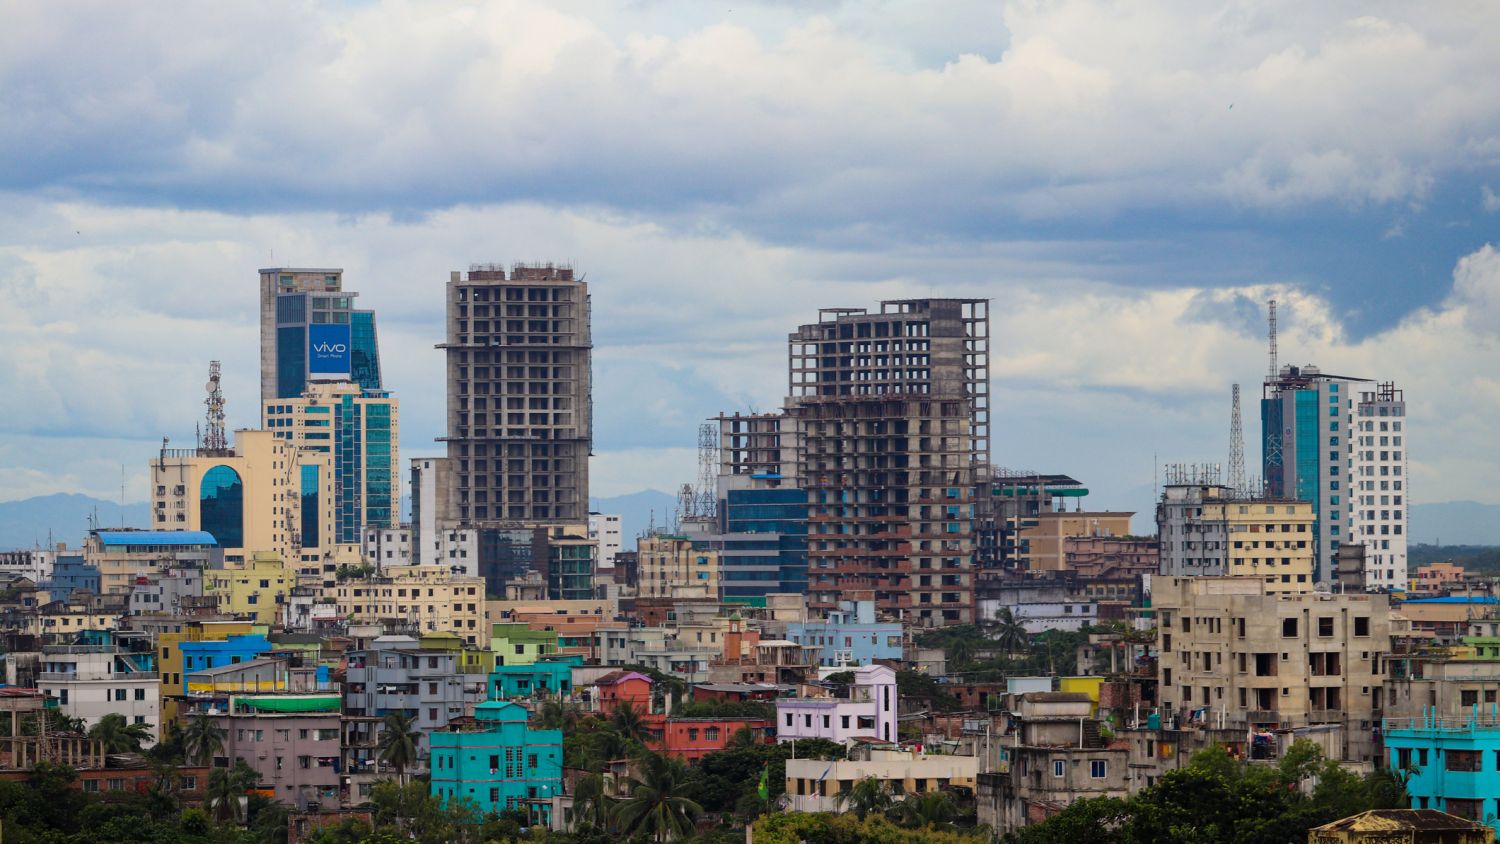 Skyline of Chittagong, Bangladesh, with cloudy sky (ID 231656511 © Morshed Alam | Dreamstime.com)